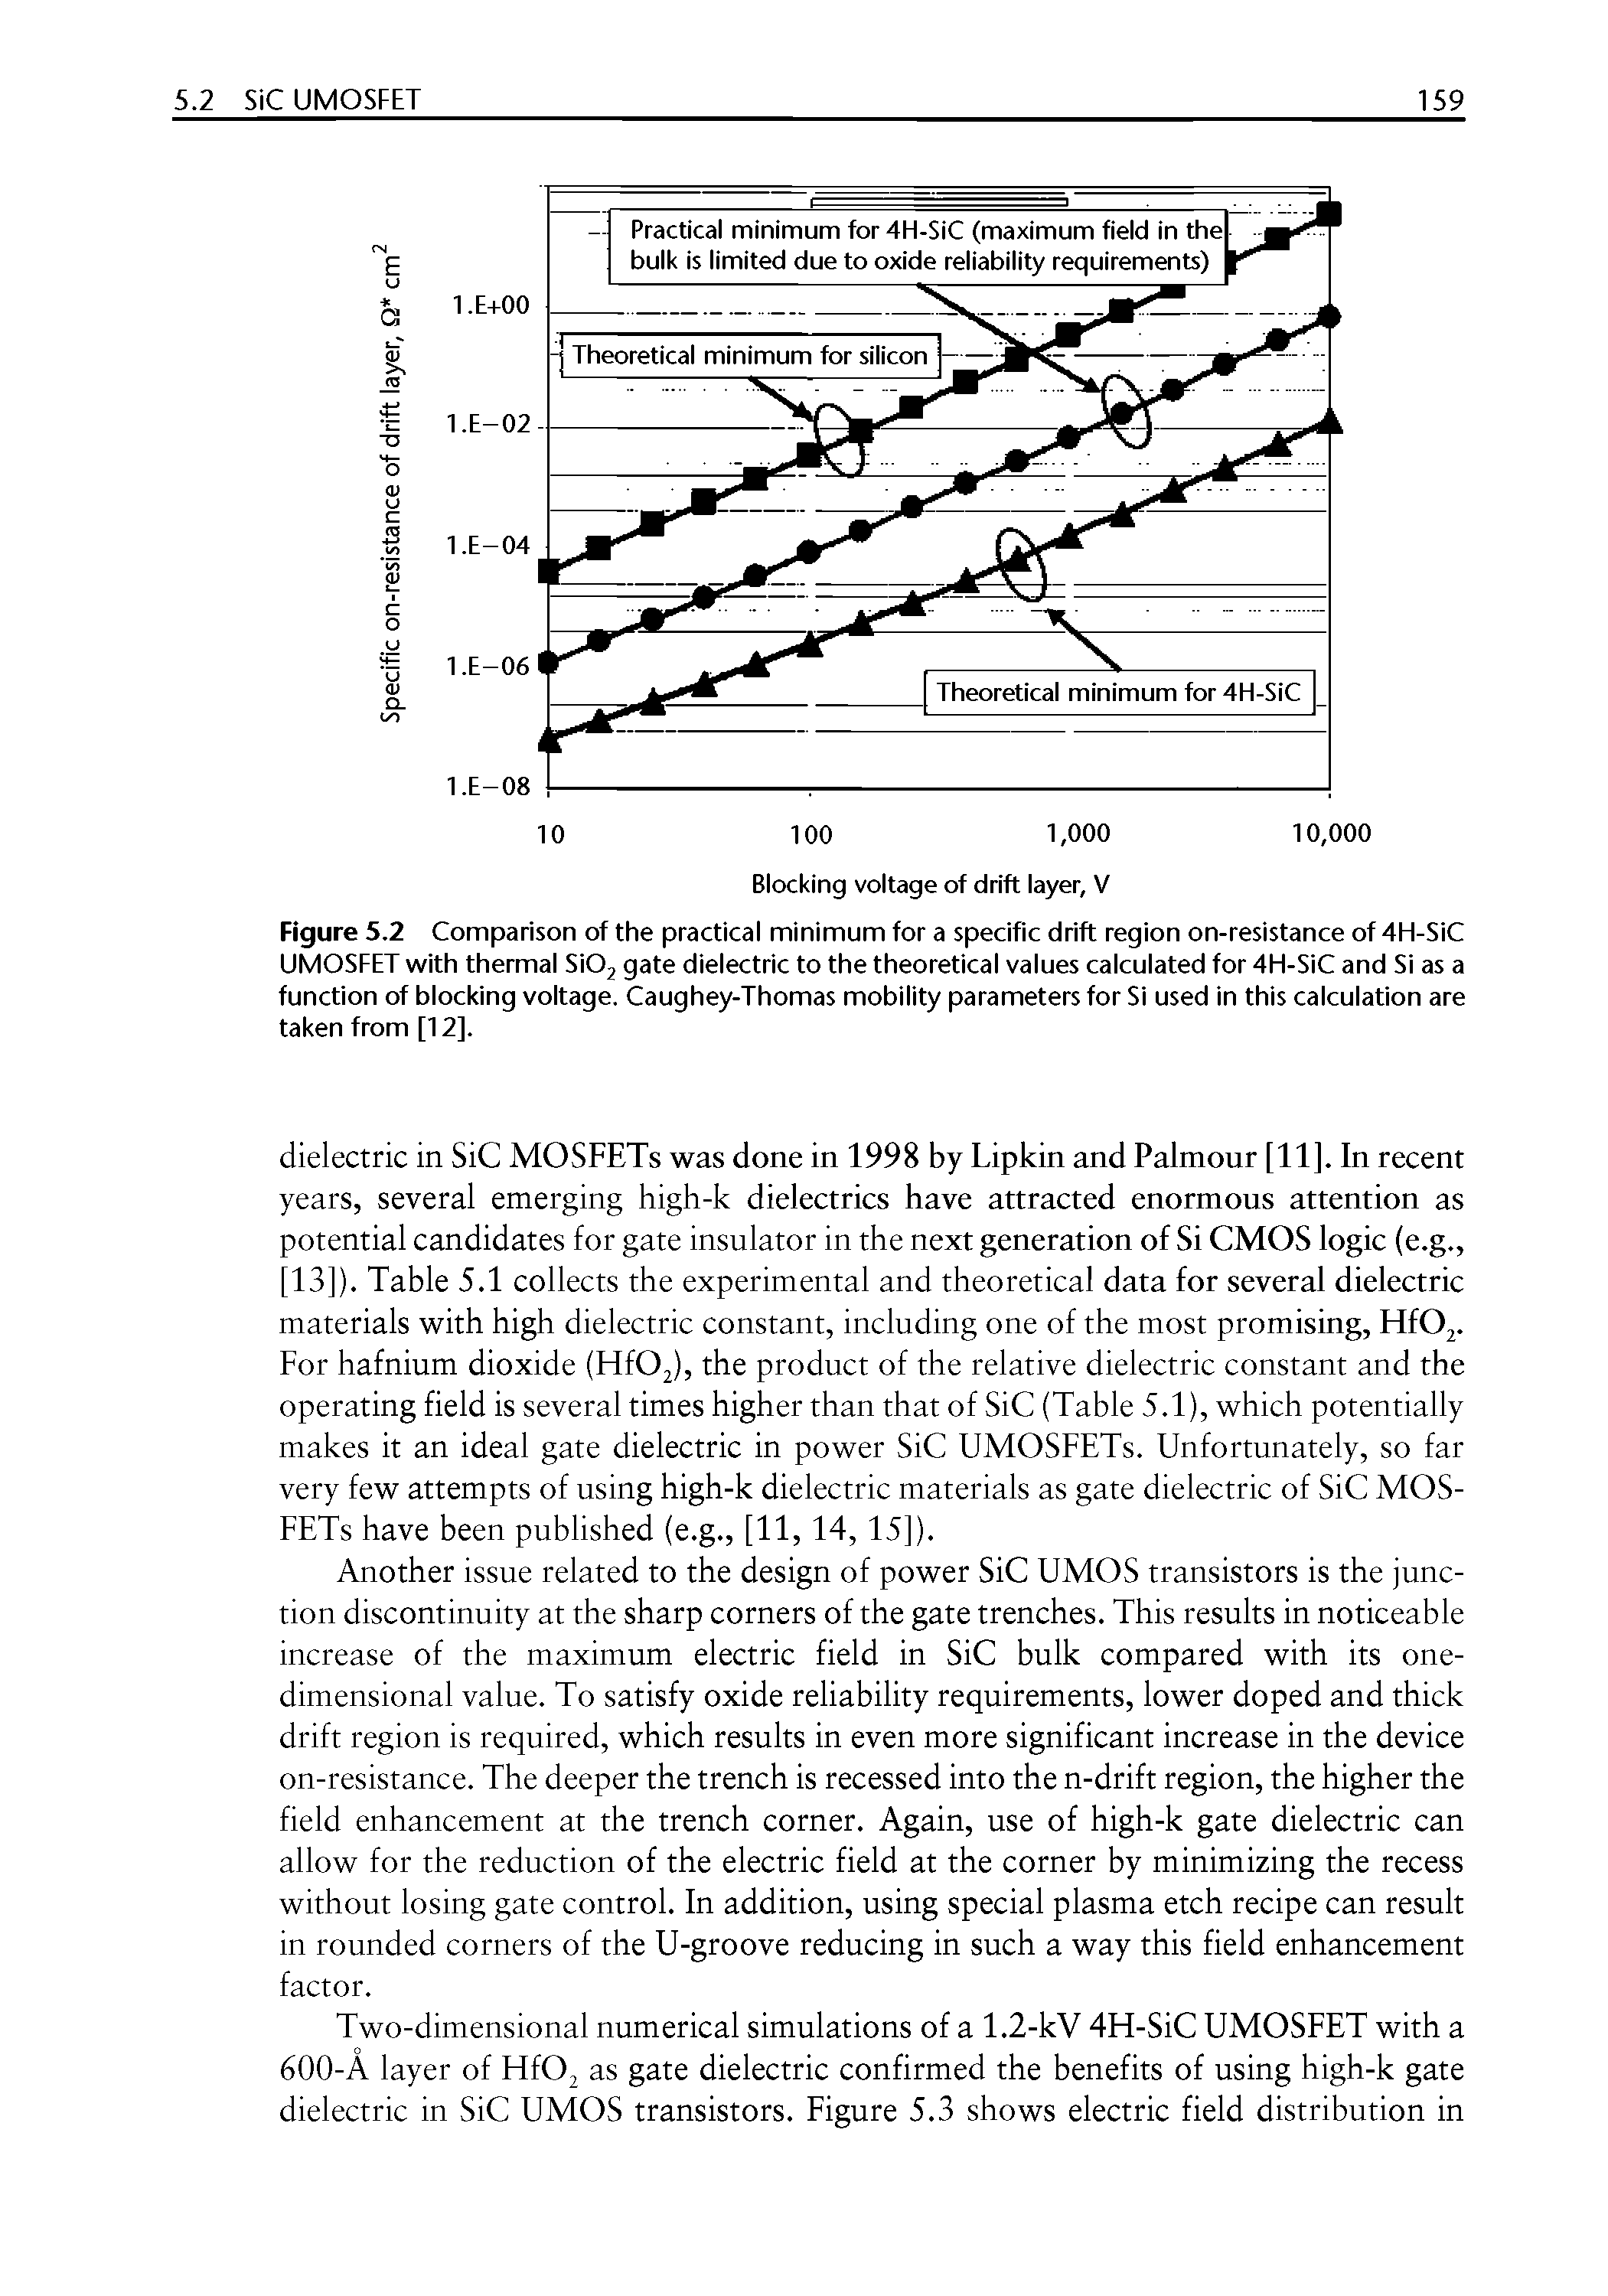 Figure 5.2 Comparison of the practical minimum for a specific drift region on-resistance of 4H-SiC UMOSFET with thermal SiOj gate dielectric to the theoretical values calculated for 4EI-SiC and Si as a function of blocking voltage. Caughey-Thomas mobility parameters for Si used in this calculation are taken from [12].